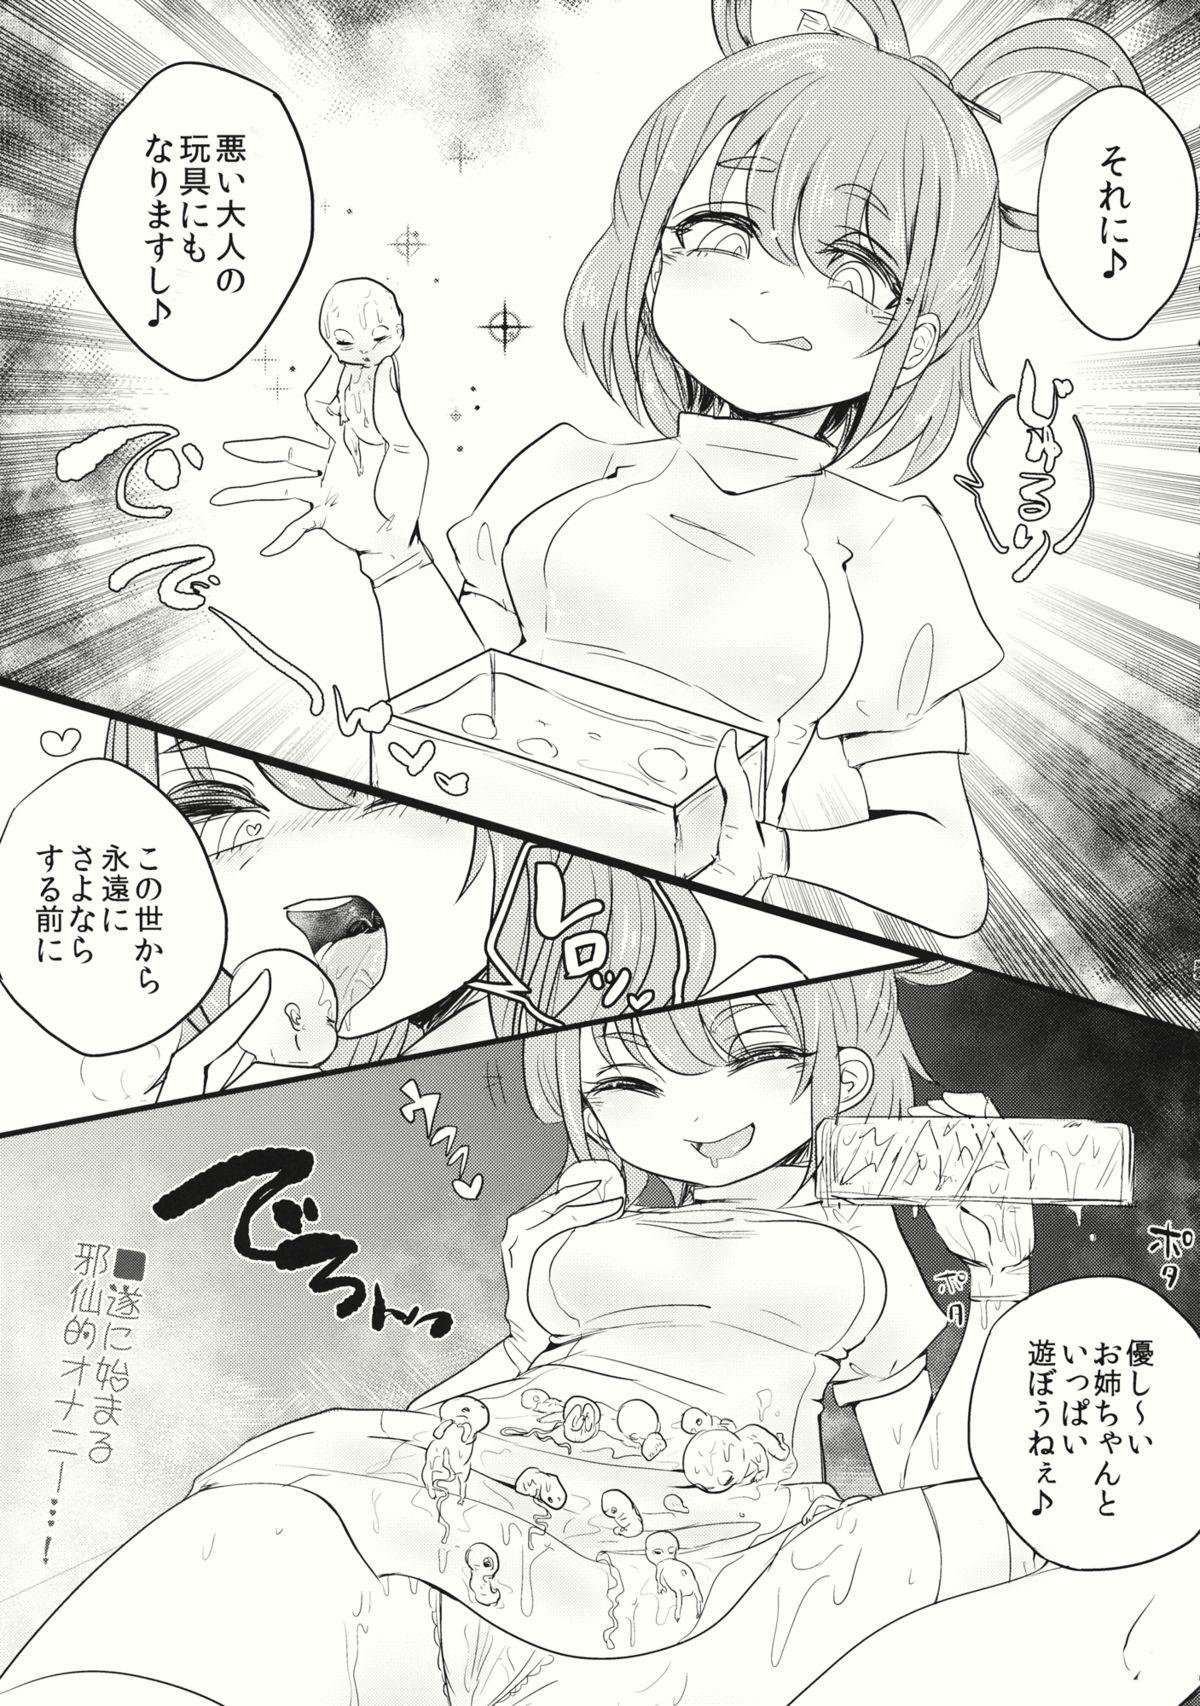 Dirty Momo to Hentai - Touhou project Super Hot Porn - Page 6